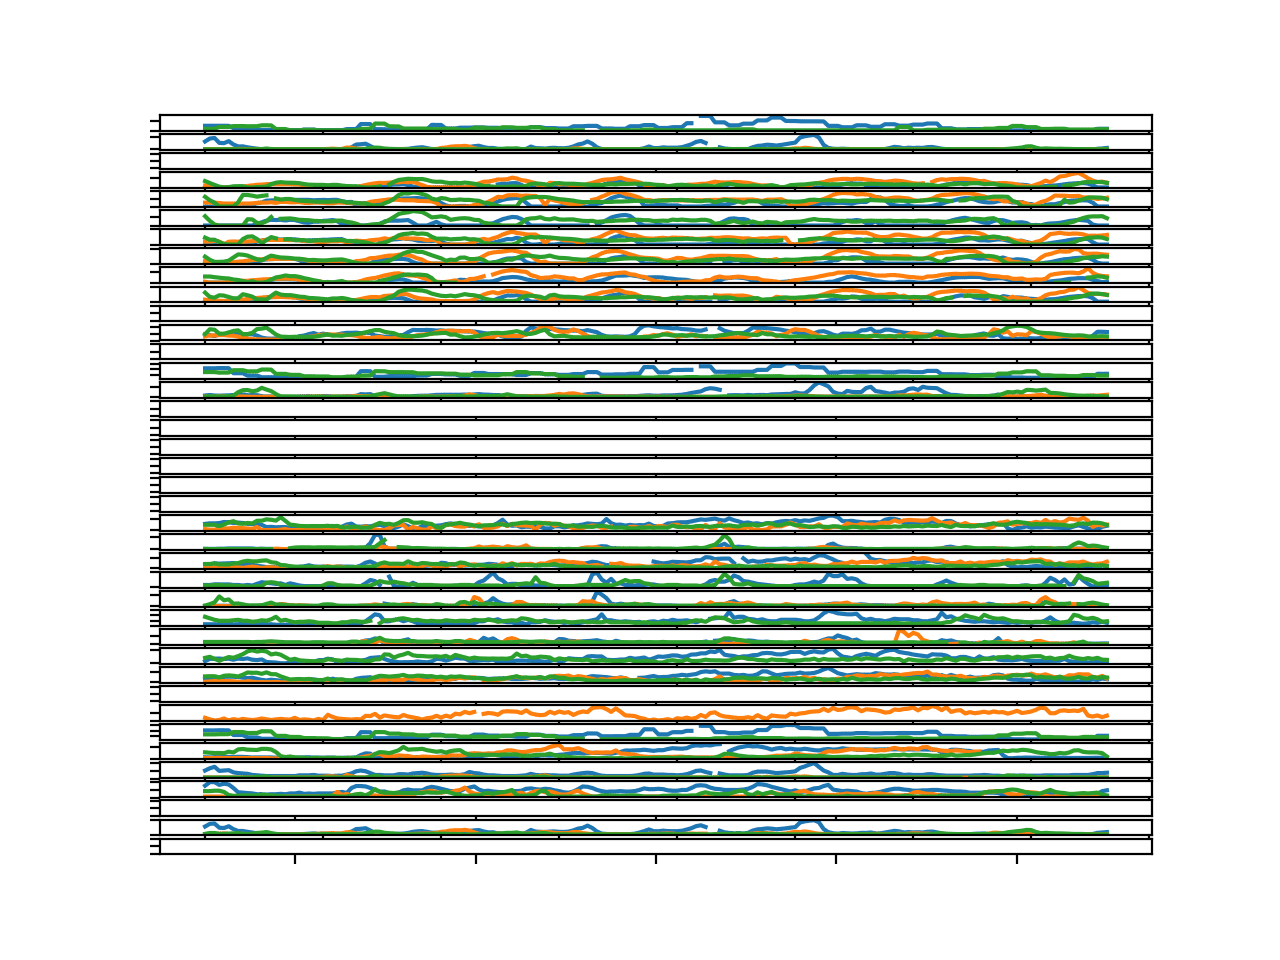 Parallel Time Series Line Plots For All Target Variables for 3 Chunks